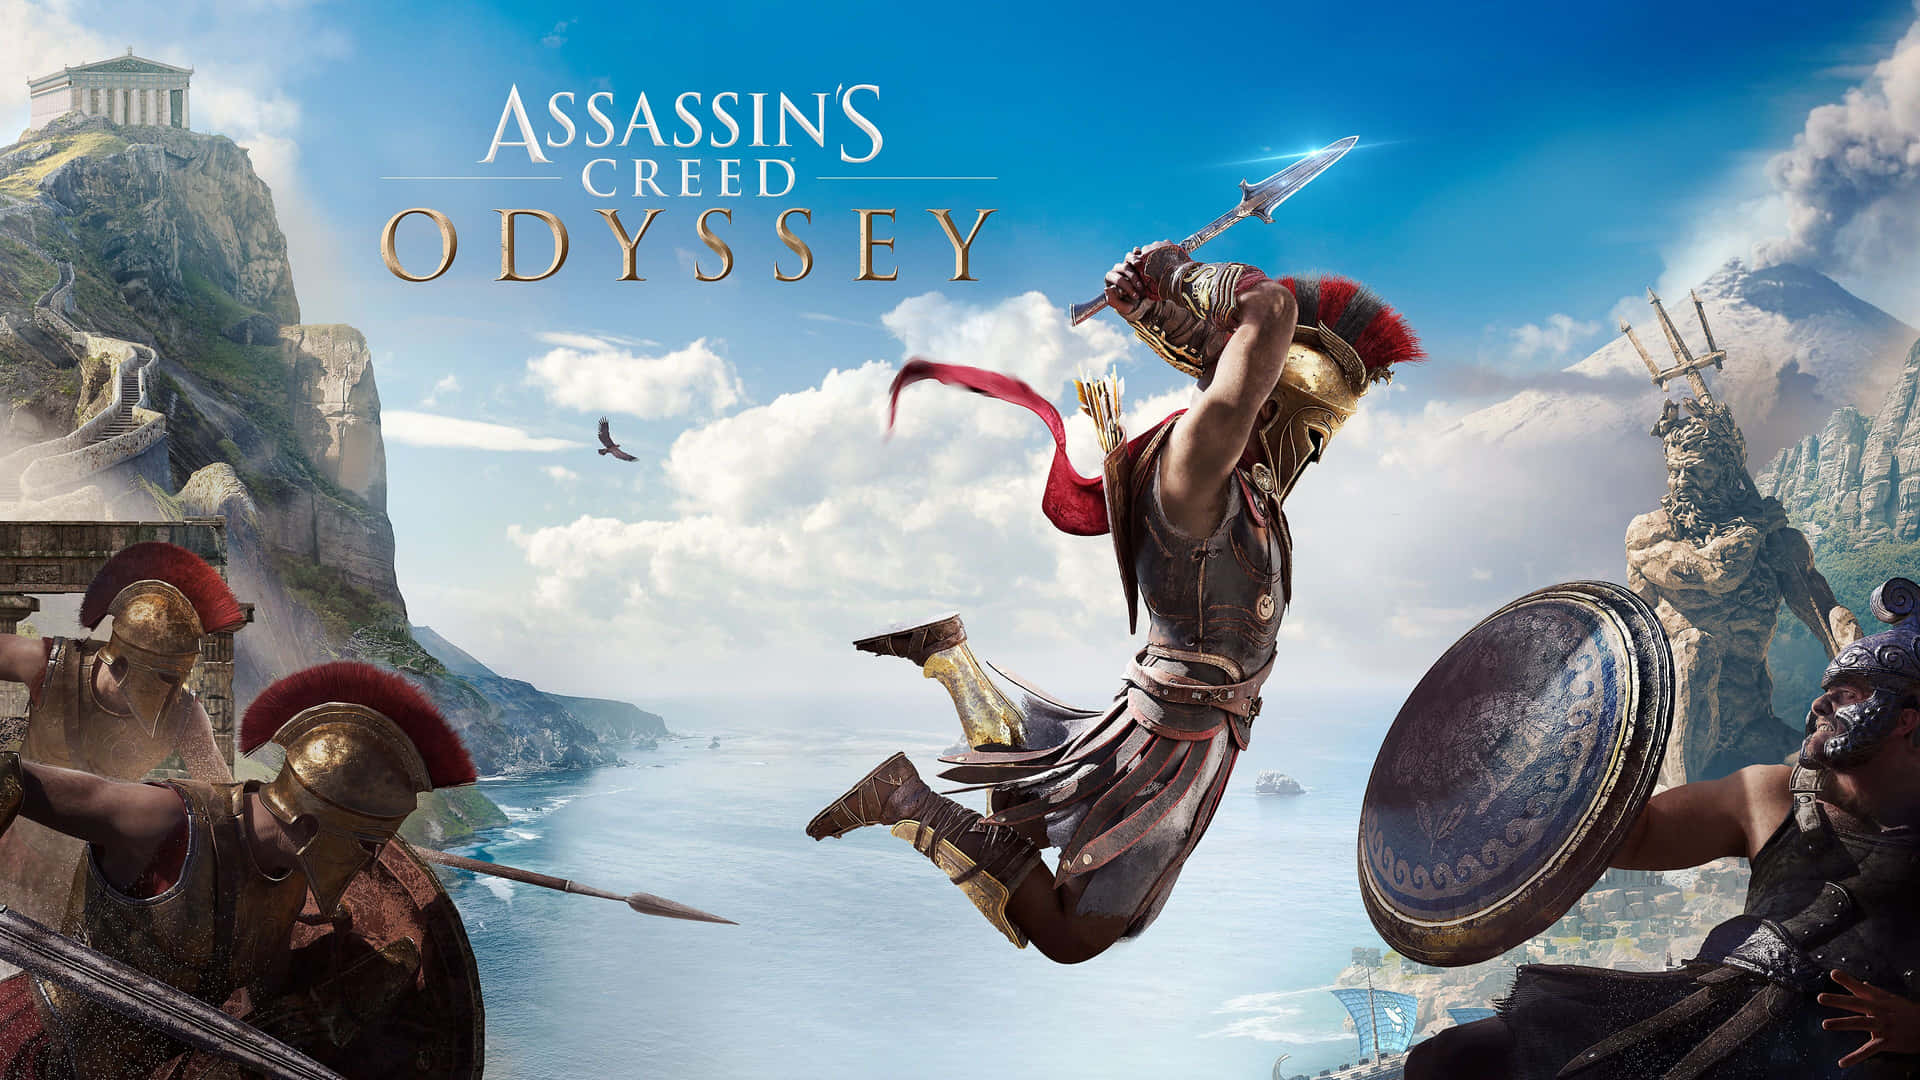 Tap for at bruge assasin's Creed Odyssey-PC-PC-PC-baggrund.